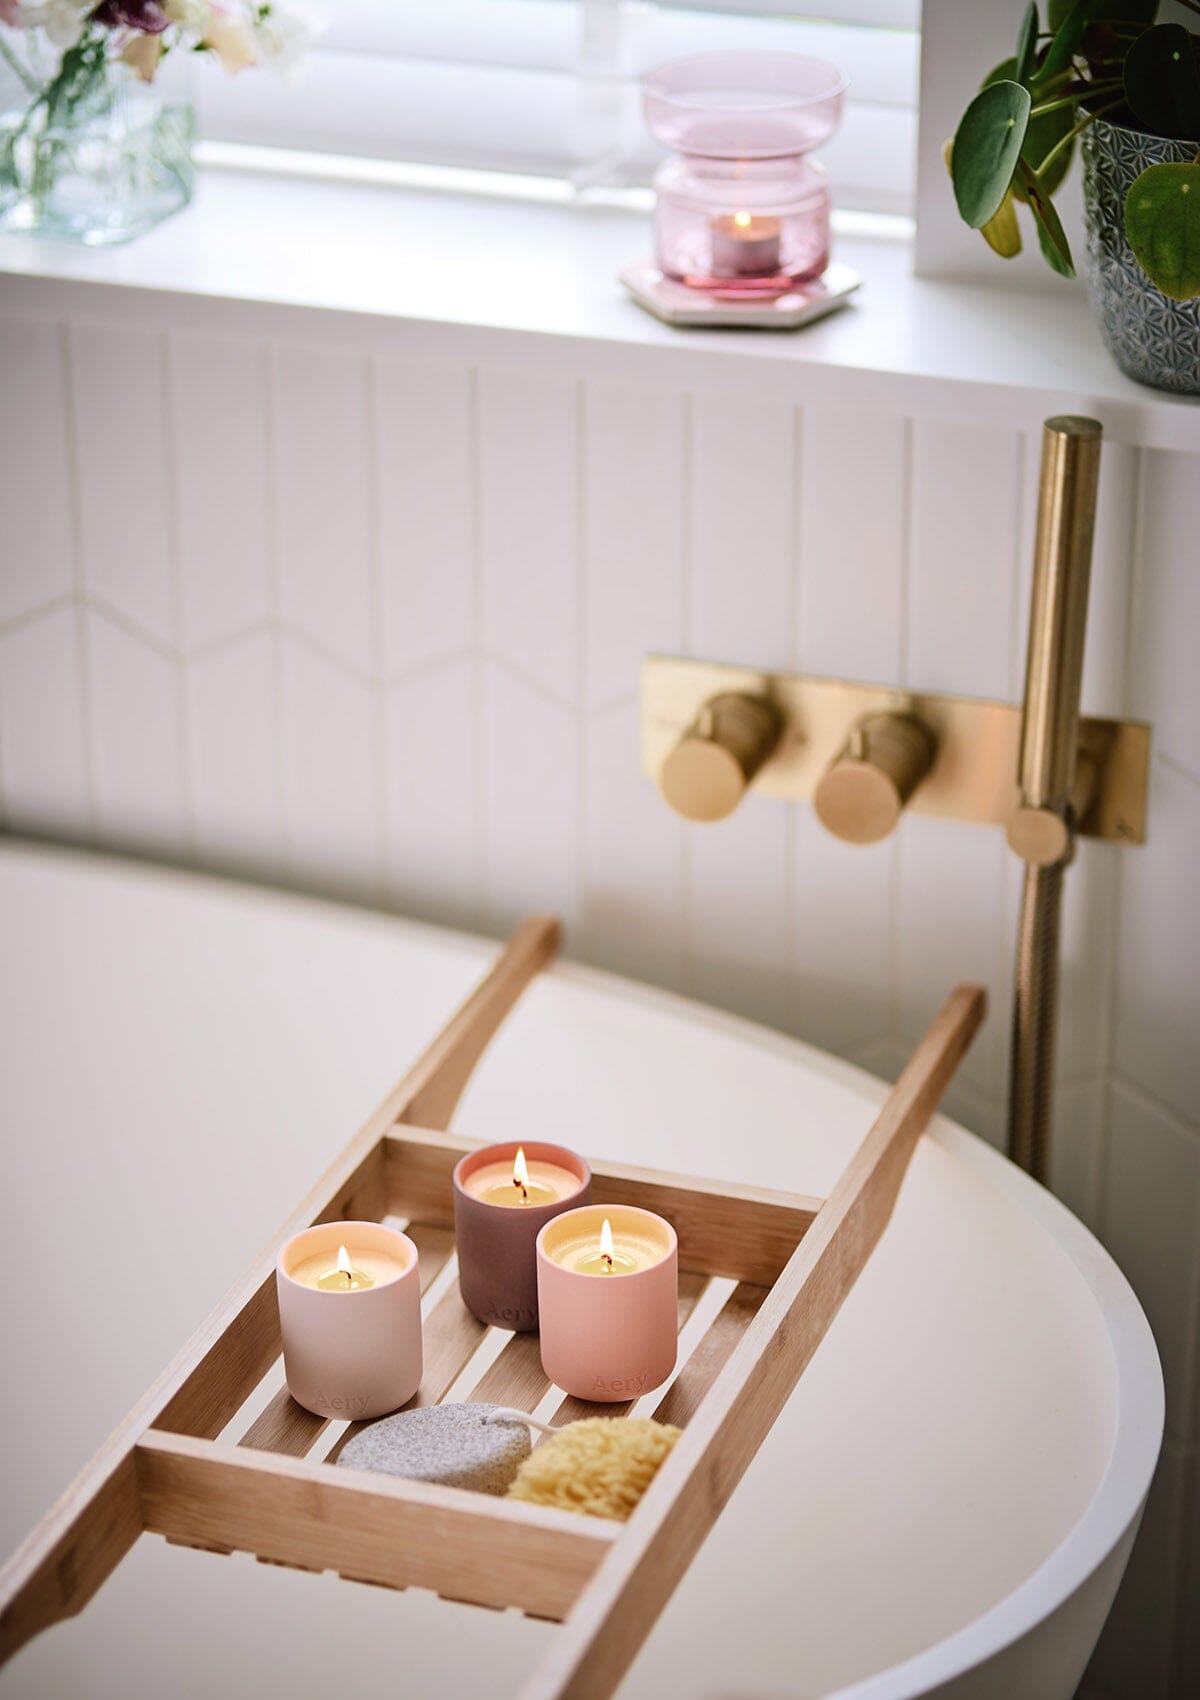 Pink Wanderlust set of three candles by Aery  placed on wooden bath tray in bathroom